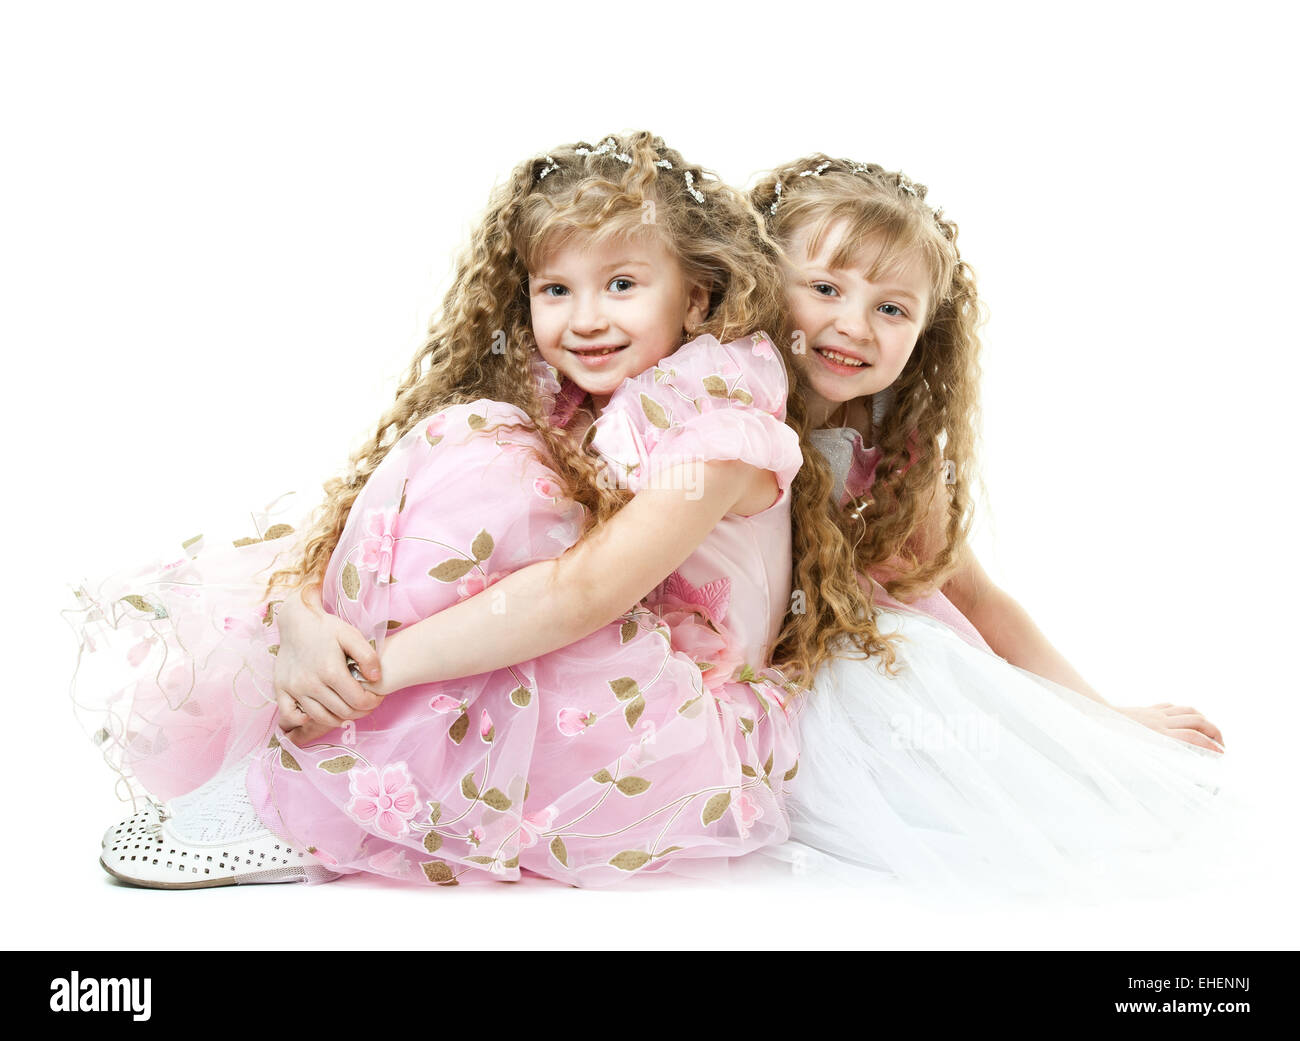 Princesses Cut Out Stock Images & Pictures - Alamy